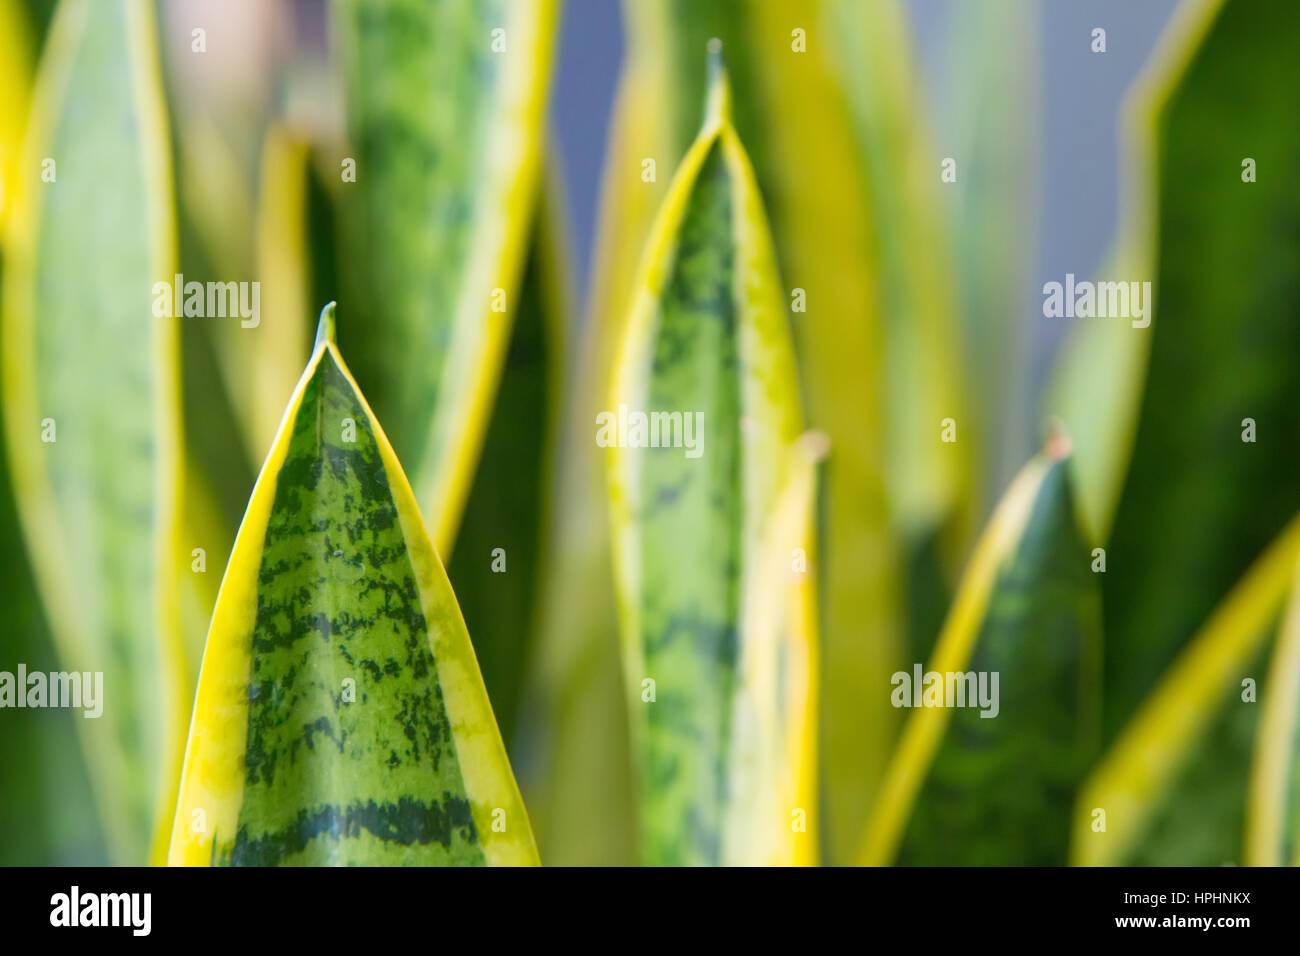 Green leaves with yellow strips background with soft selective focus on leaves Stock Photo